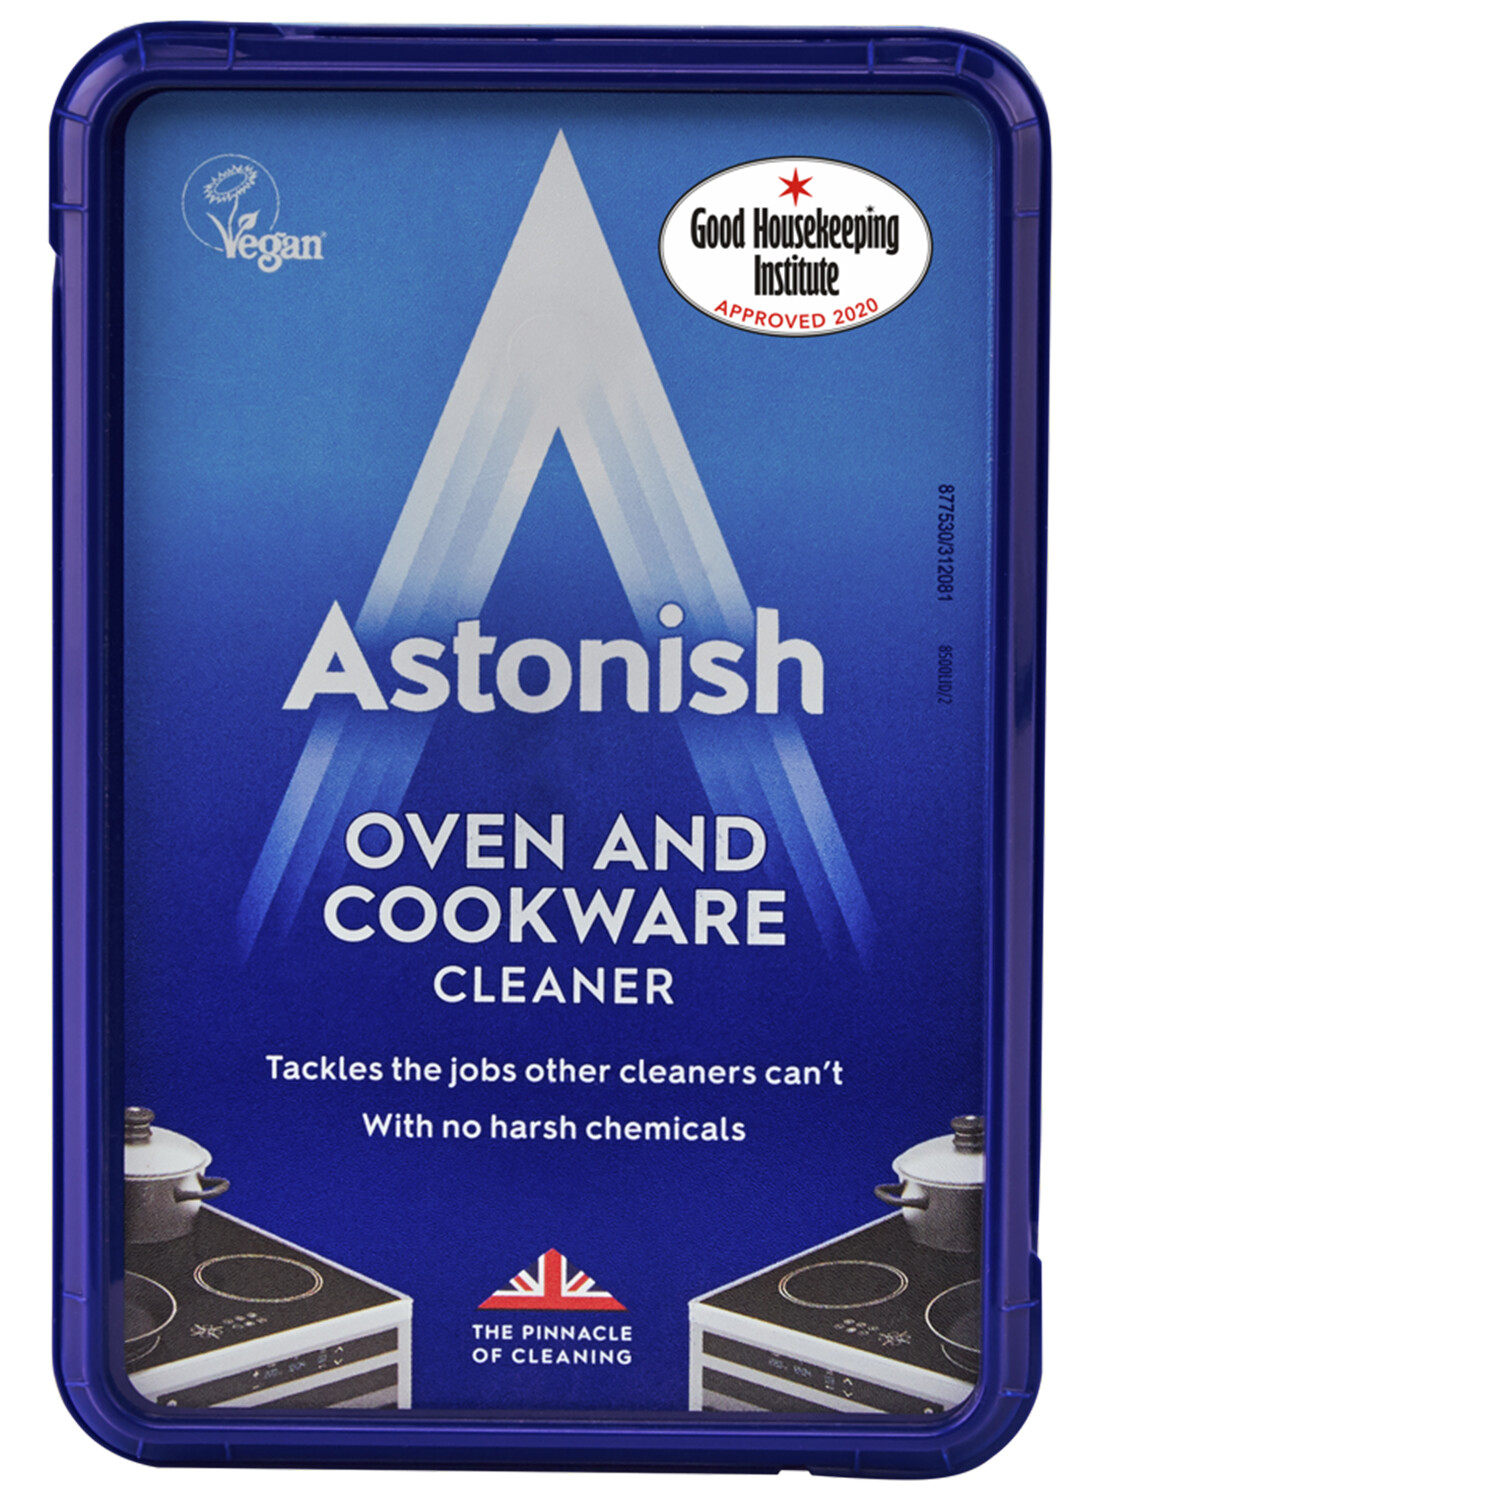 Astonish Oven and Cookware Cleaning Paste Image